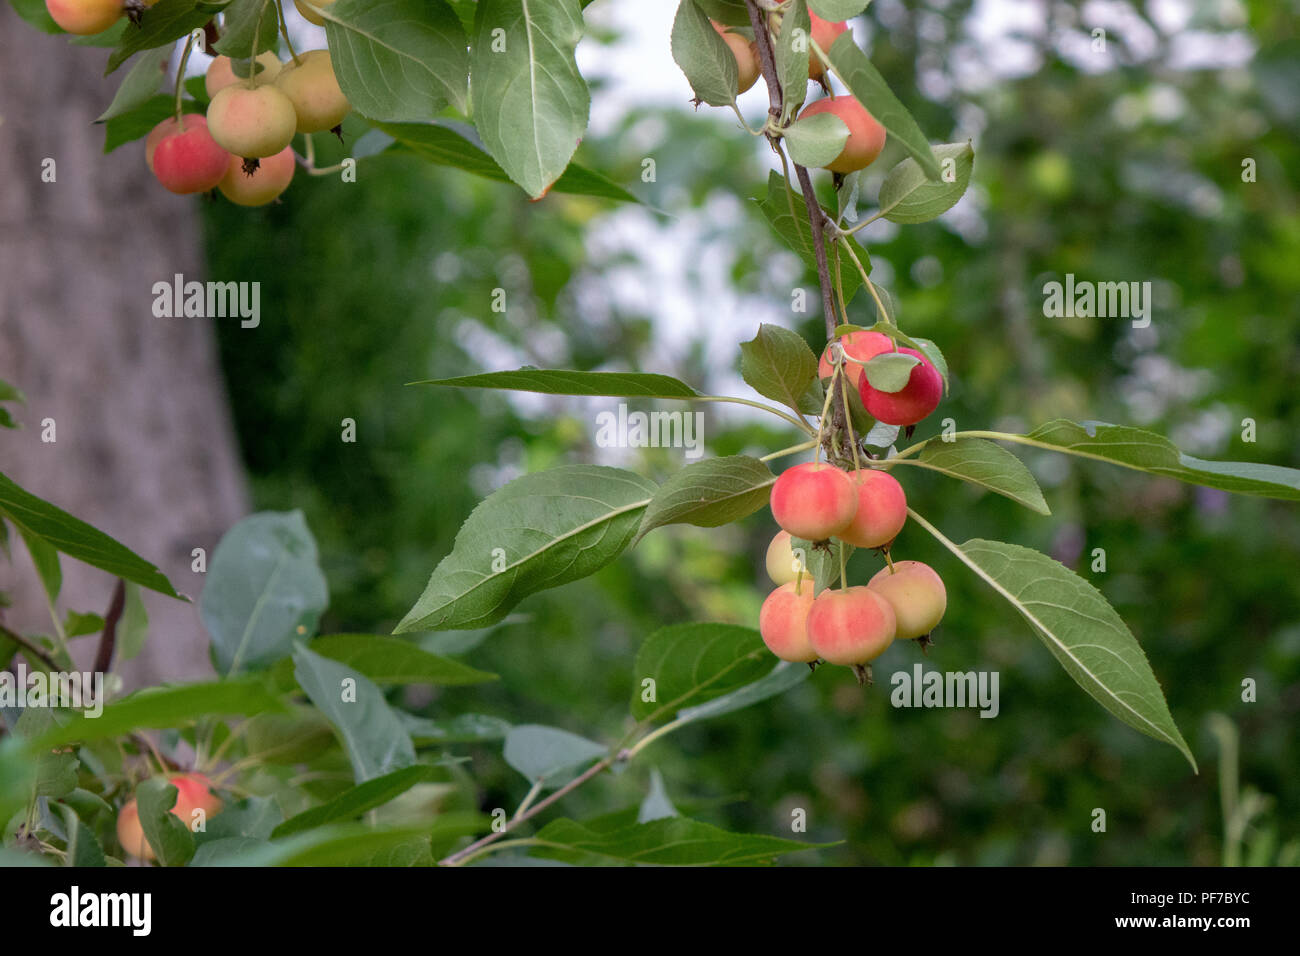 Red ripe paradise apples on a green branch in the garden. Harvest time. Stock Photo